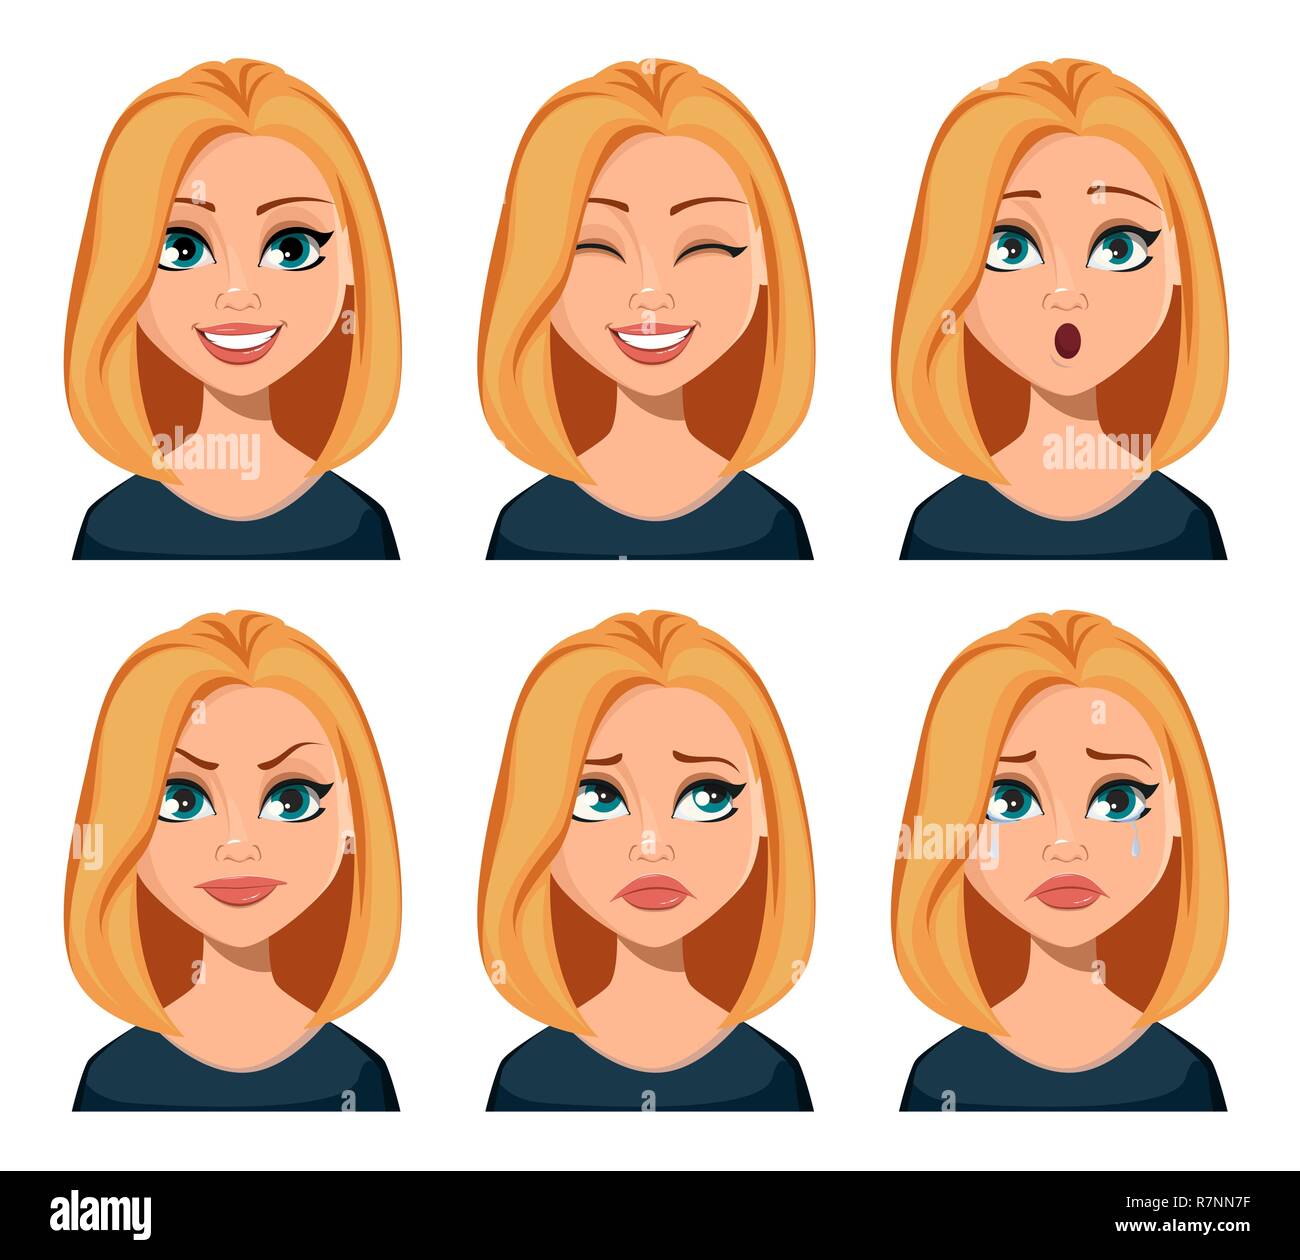 Face Expressions Of Woman With Blond Hair Different Female Emotions